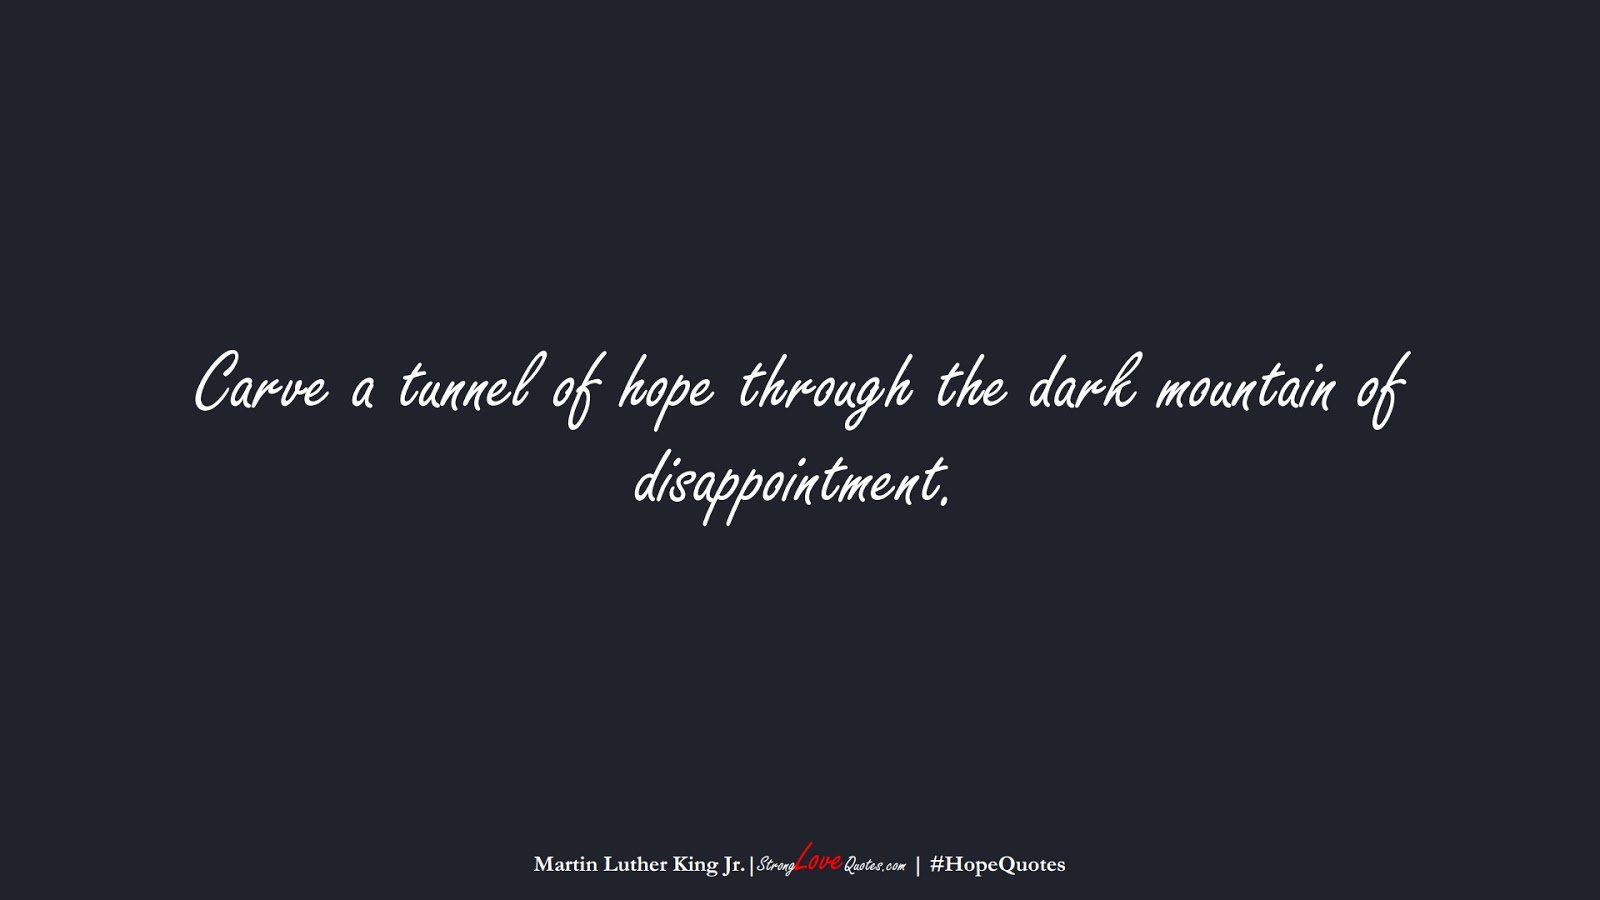 Carve a tunnel of hope through the dark mountain of disappointment. (Martin Luther King Jr.);  #HopeQuotes